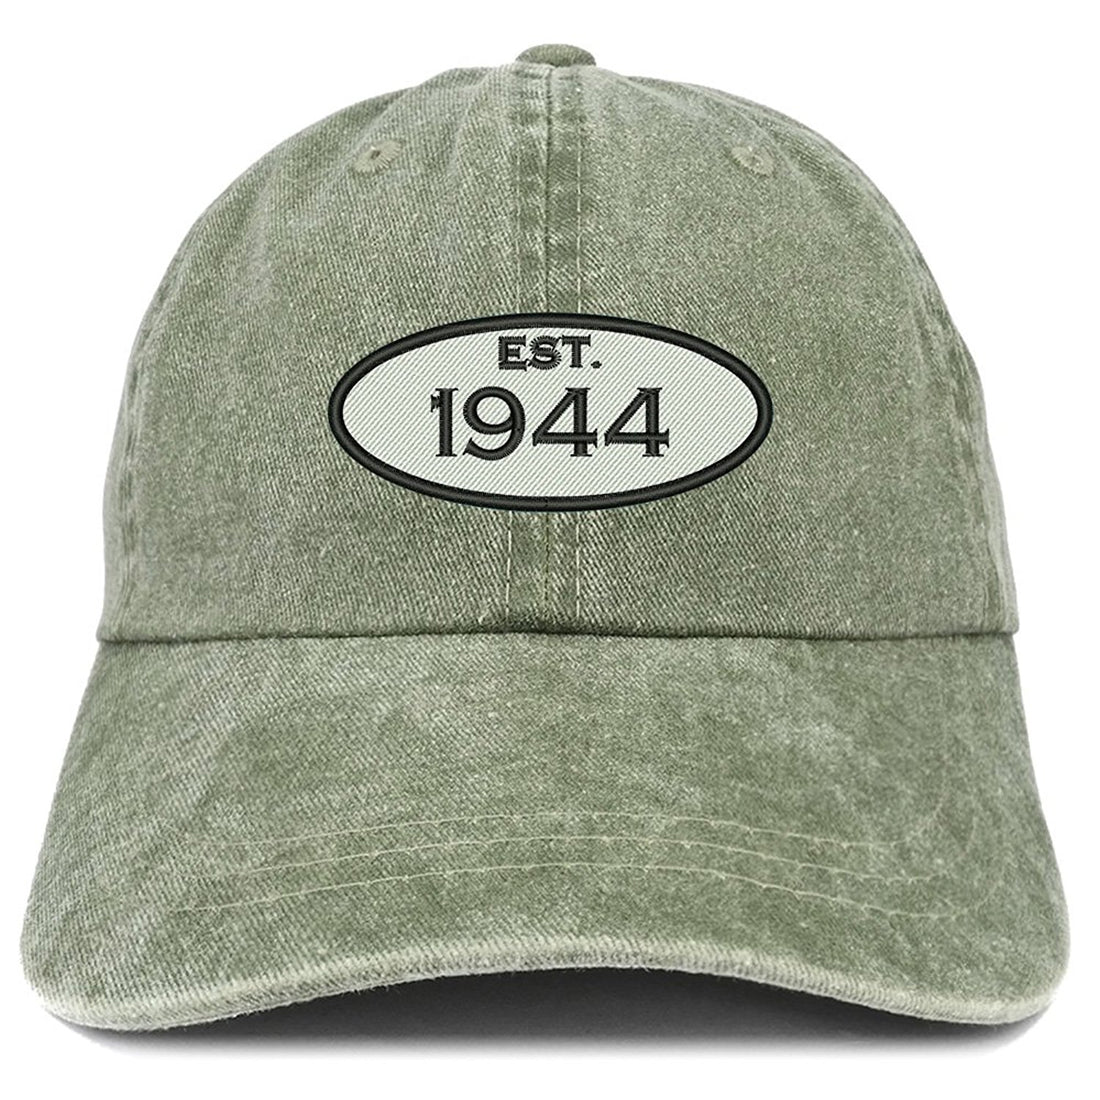 Trendy Apparel Shop Established 1944 Embroidered 75th Birthday Gift Pigment Dyed Washed Cotton Cap